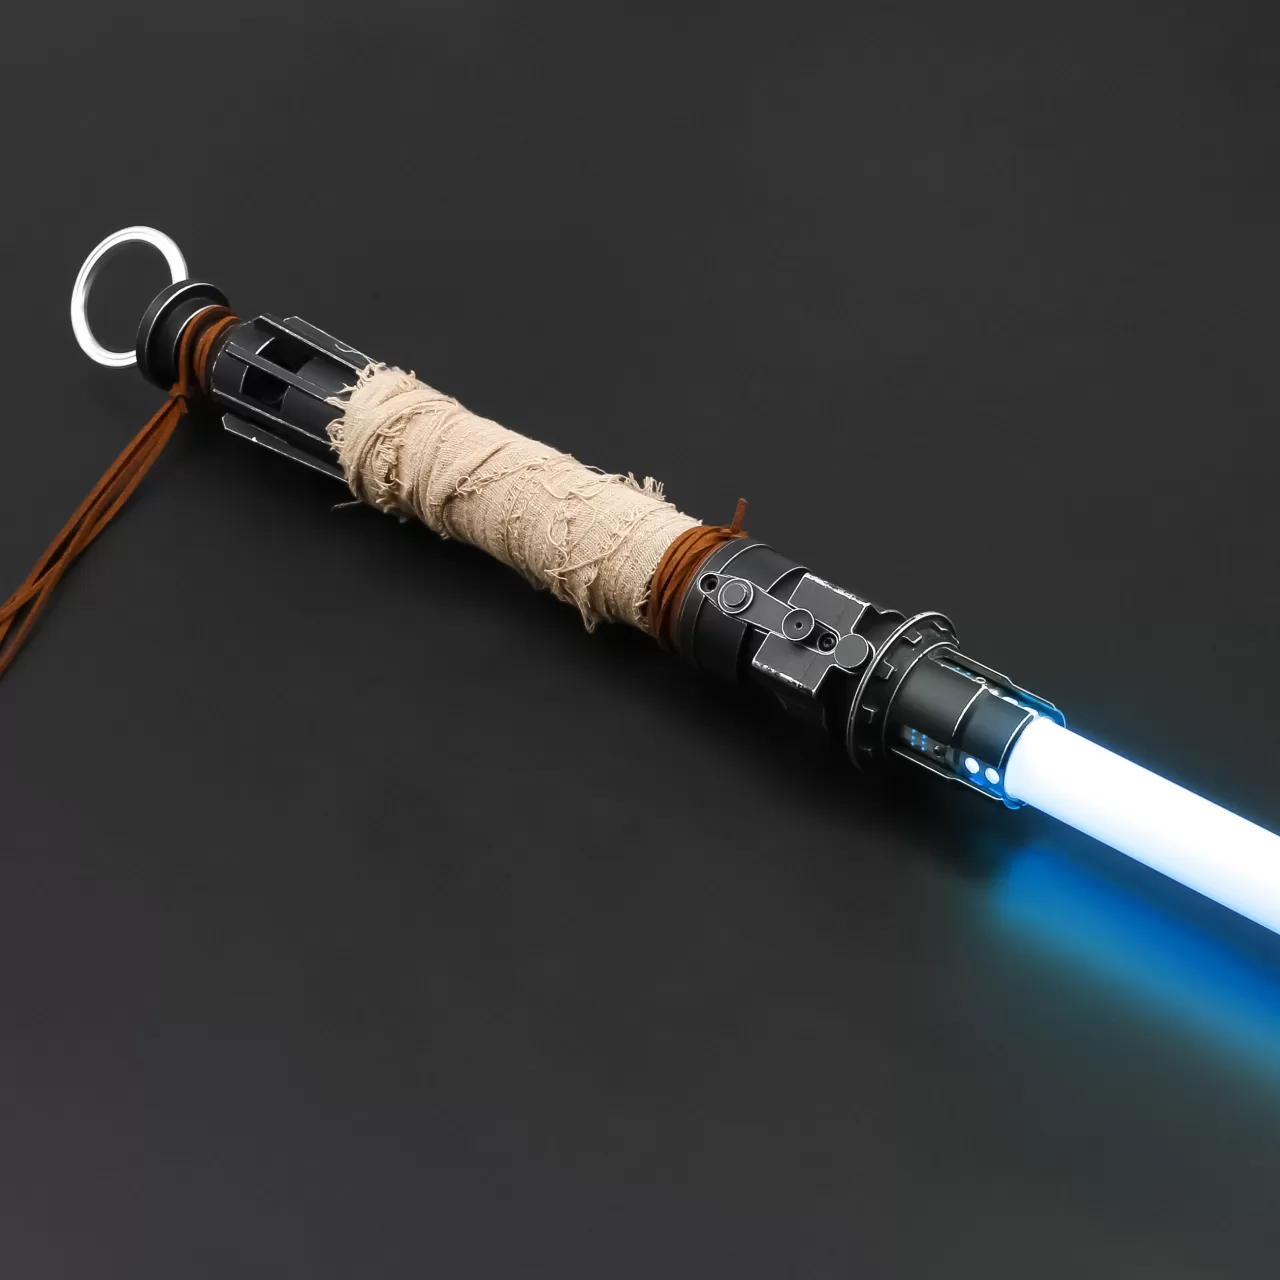 A custom lightsaber from DynamicSabers img#1